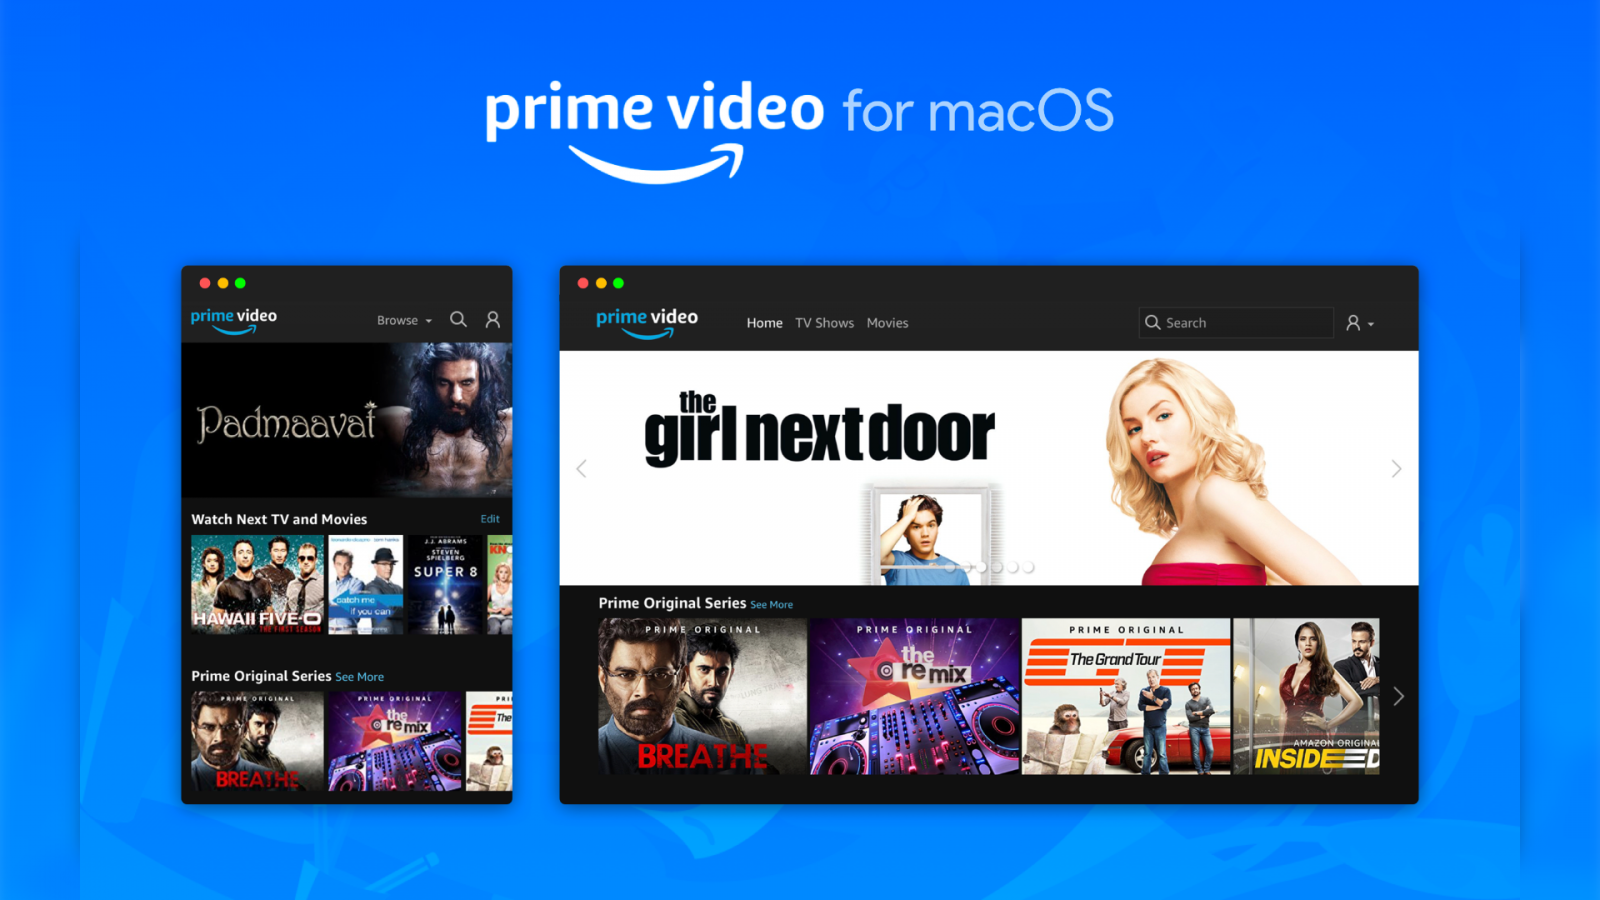 Amazon Prime Video for MacOS